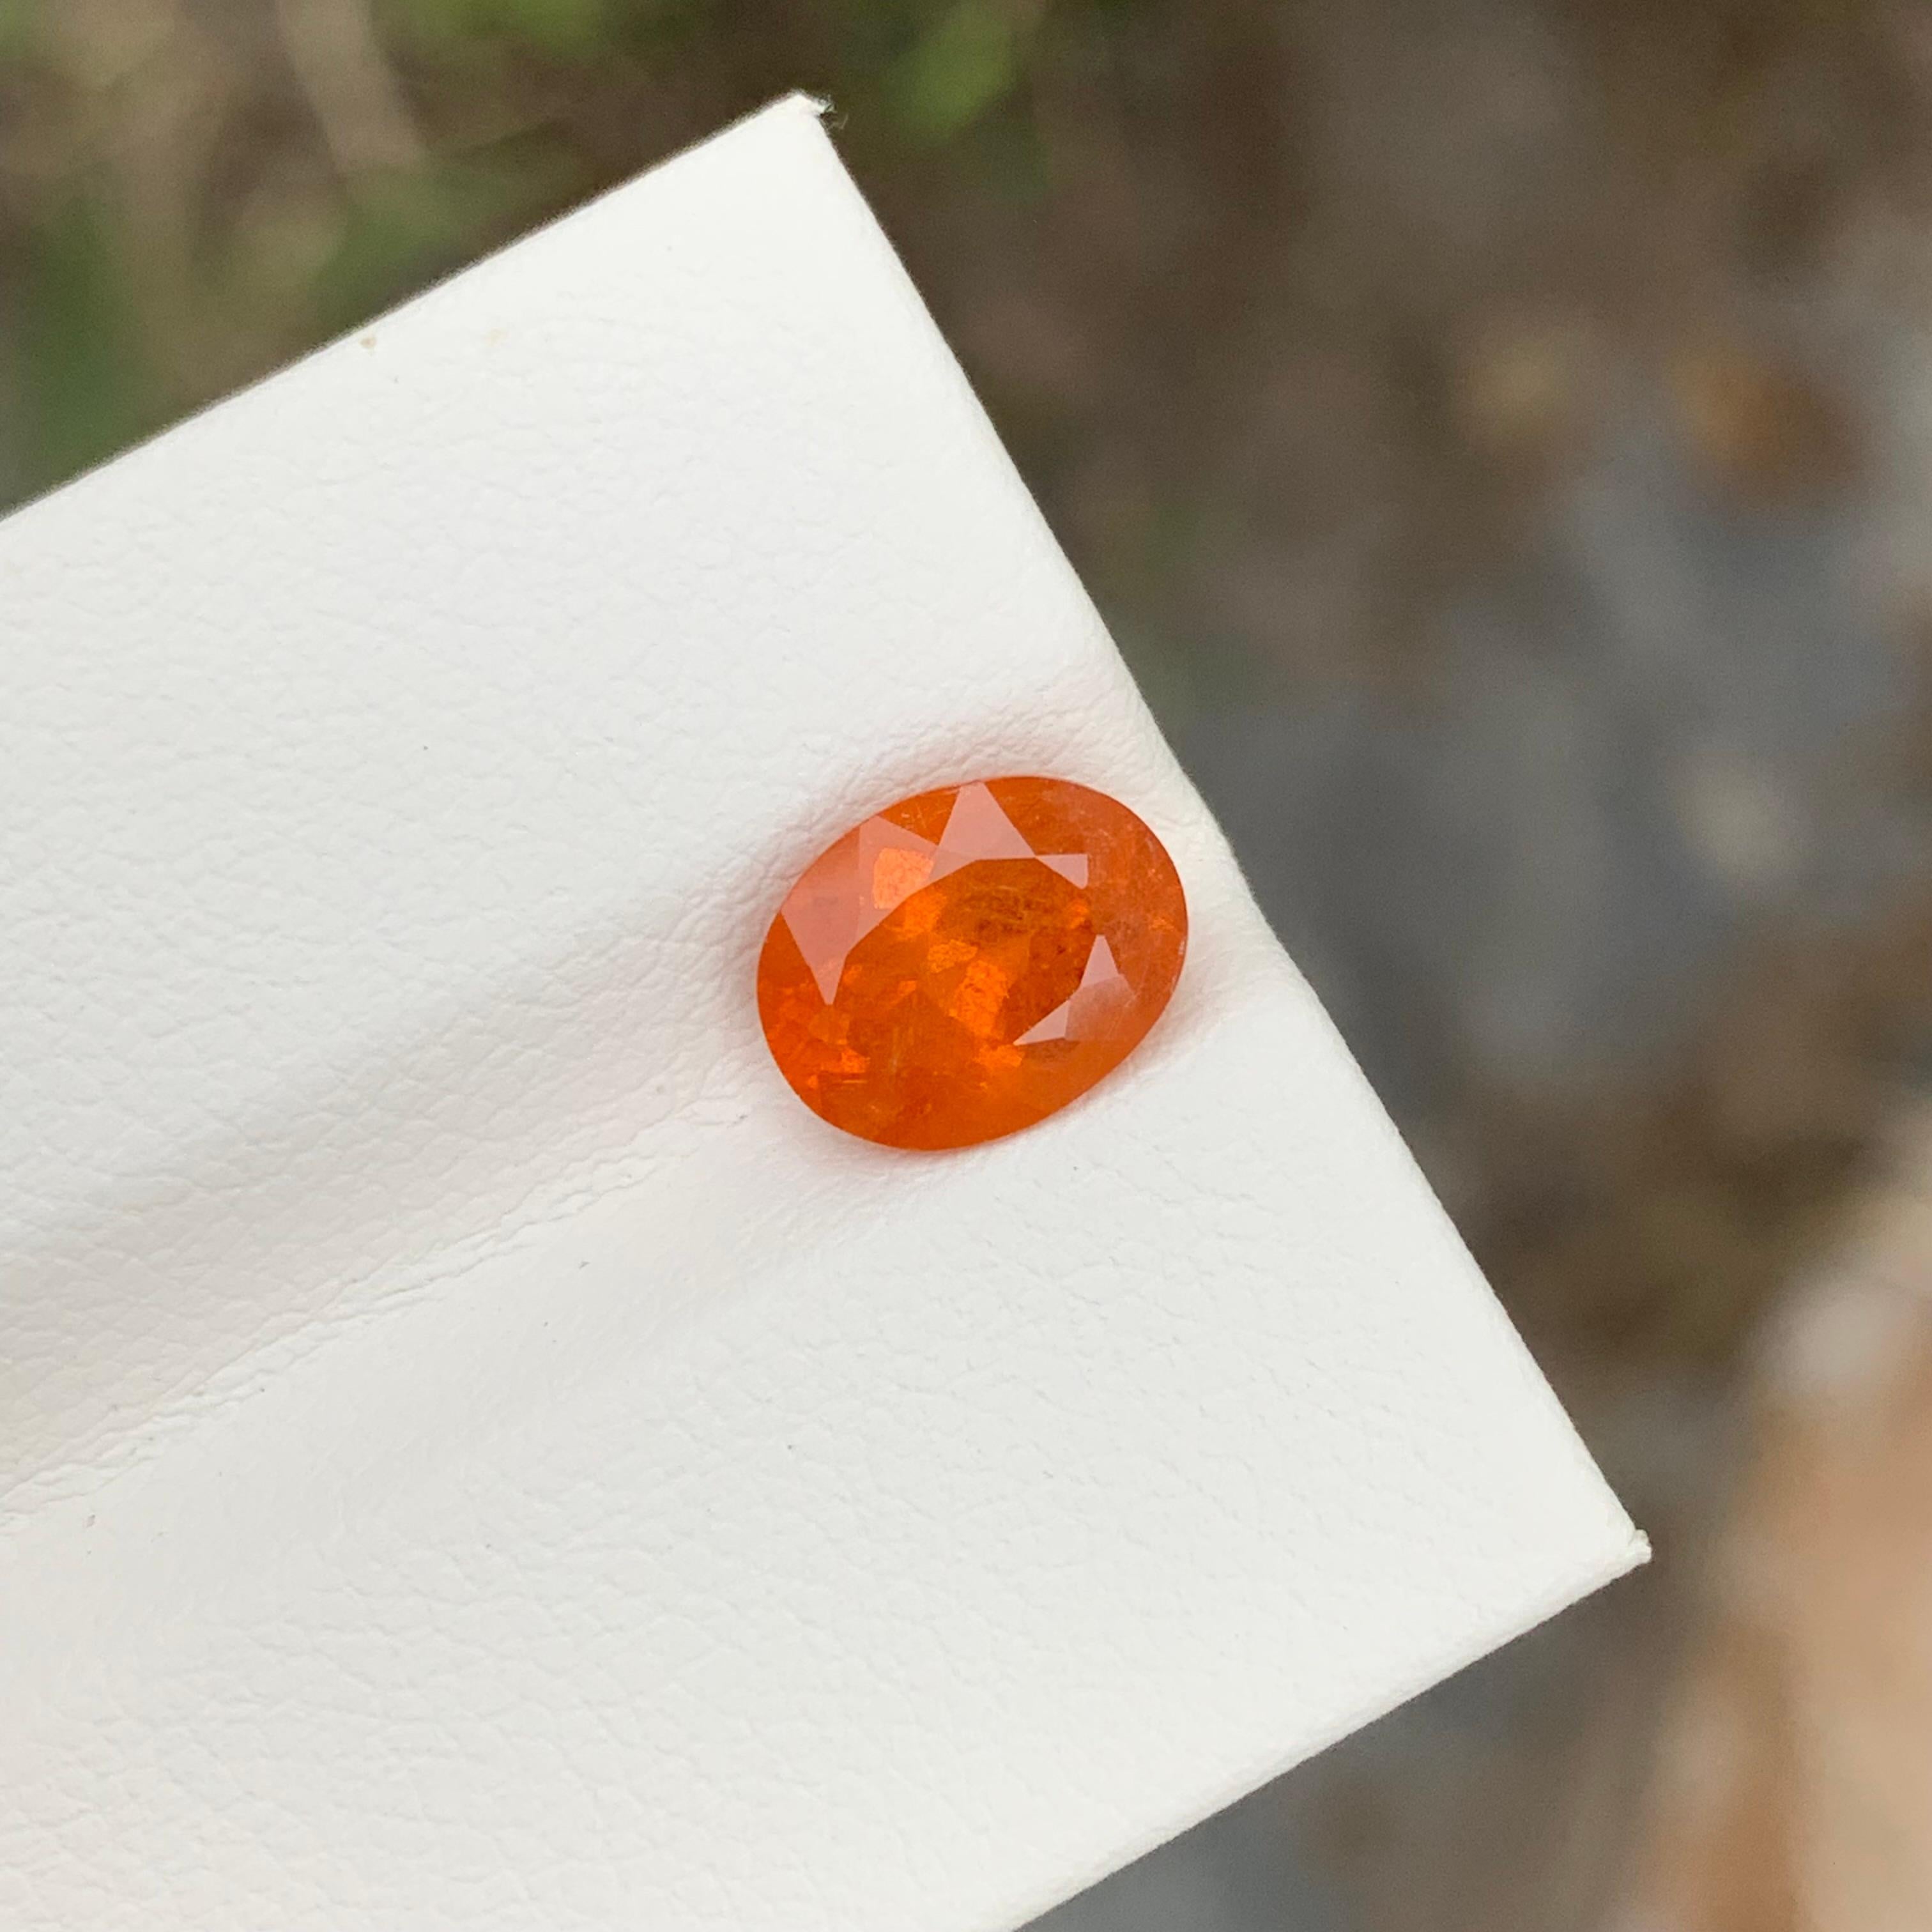 Loose Spessartine Garnet
Weight: 2.40 Carats
Dimension: 8.7 x 6.9 x 4.6 Mm
Colour: Orange
Treatment: Non
Shape: Oval
Certificate: On Demand


Spessartine garnet, often referred to simply as spessartine, is a captivating gemstone prized for its